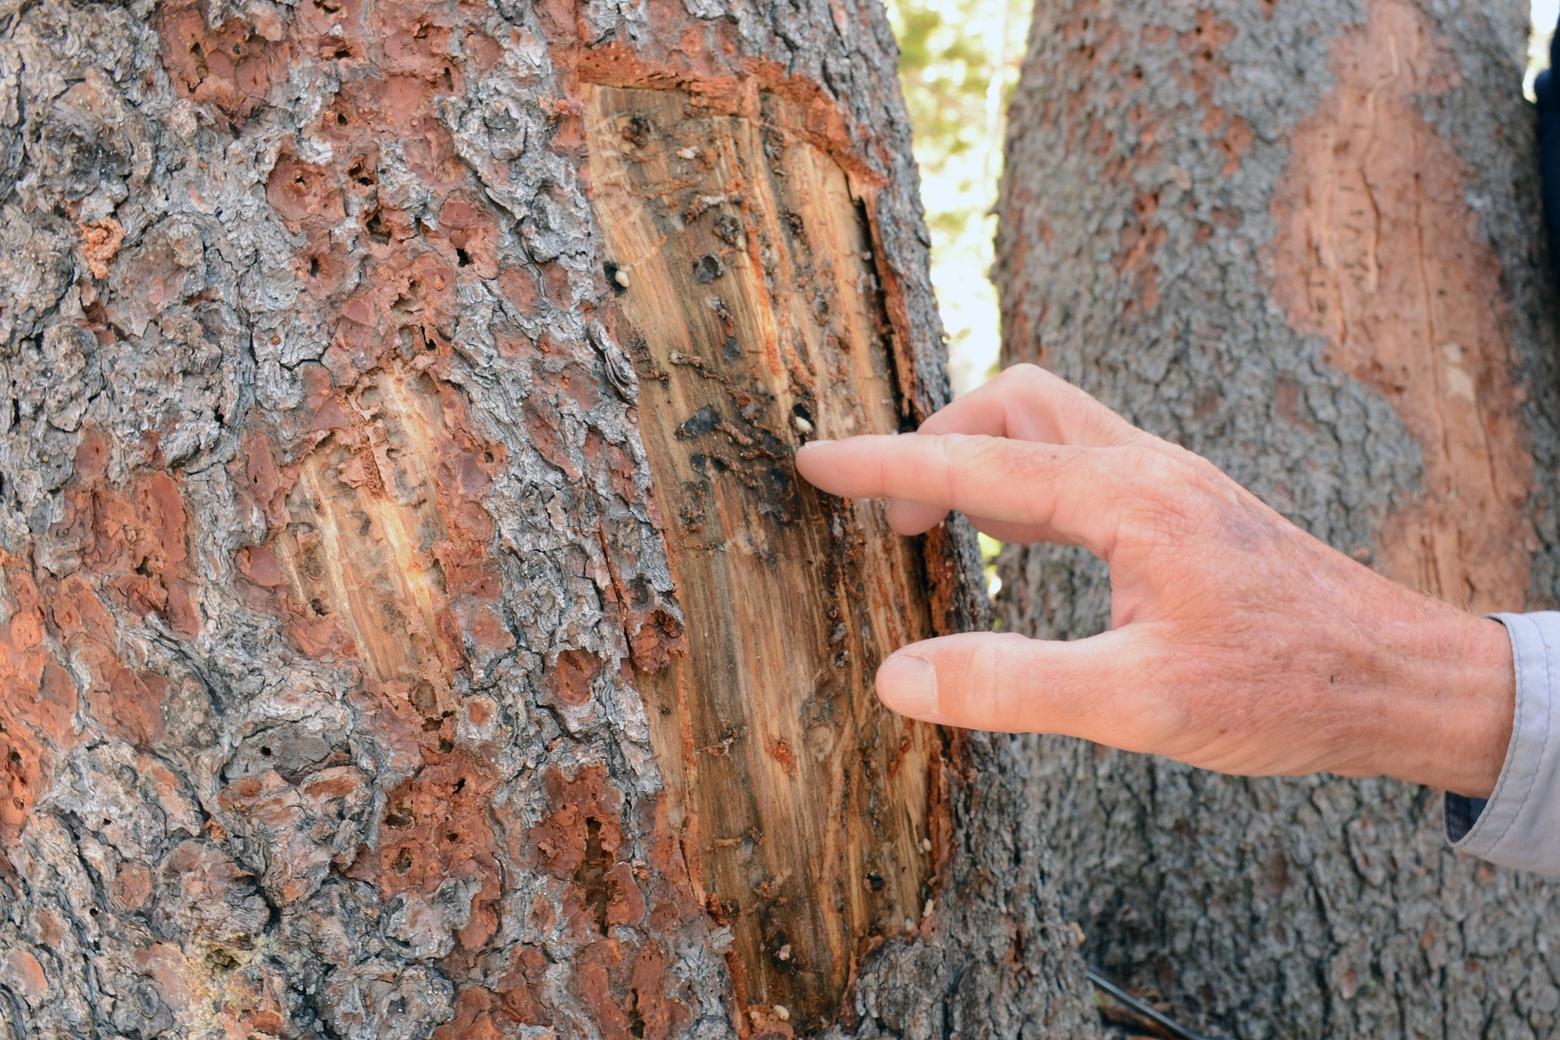 After peeling back the bark of a whitebark pine tree, former Forest Service Climate Change researcher Jesse Logan points to the mountain pine beetle larvae growing in the tree. Photo by Laura Lundquist